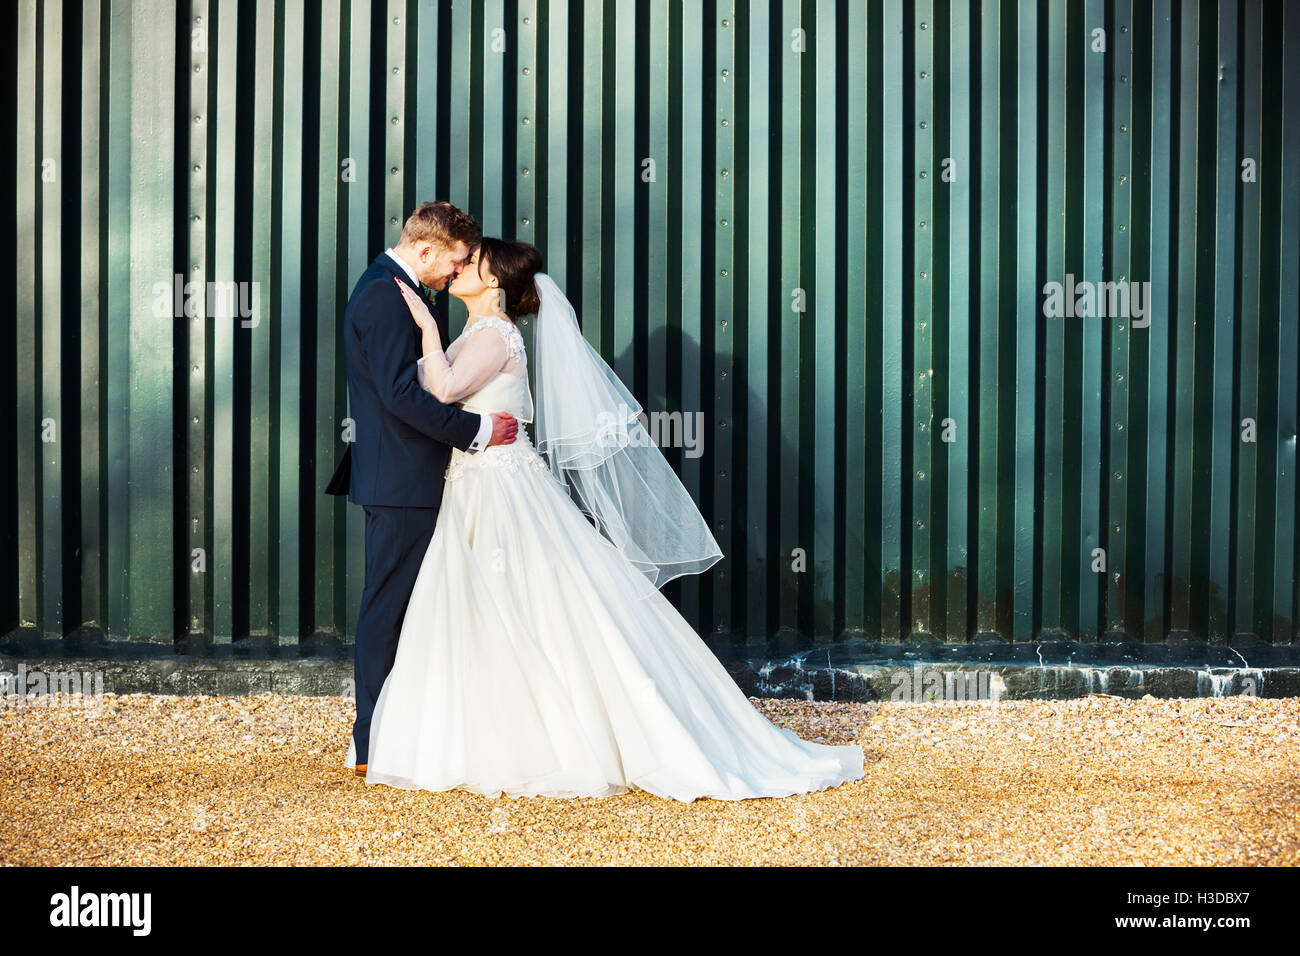 A bride and bridegroom on their wedding day, kissing each other. Stock Photo